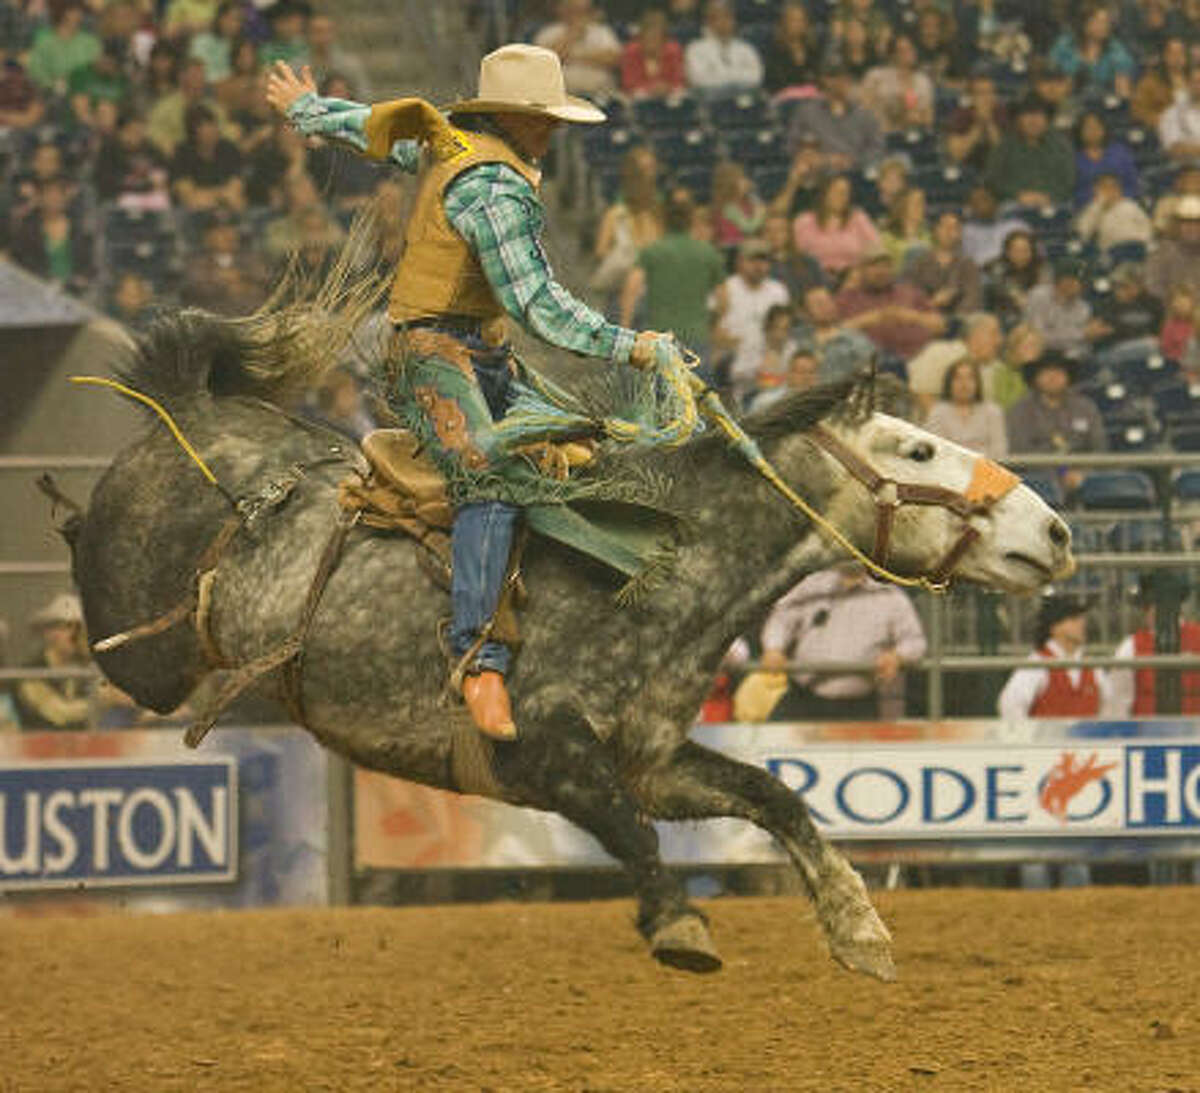 Dustin Flundra rides "Current Affair" in the saddle bronc event at the Houston Livestock Show and Rodeo.